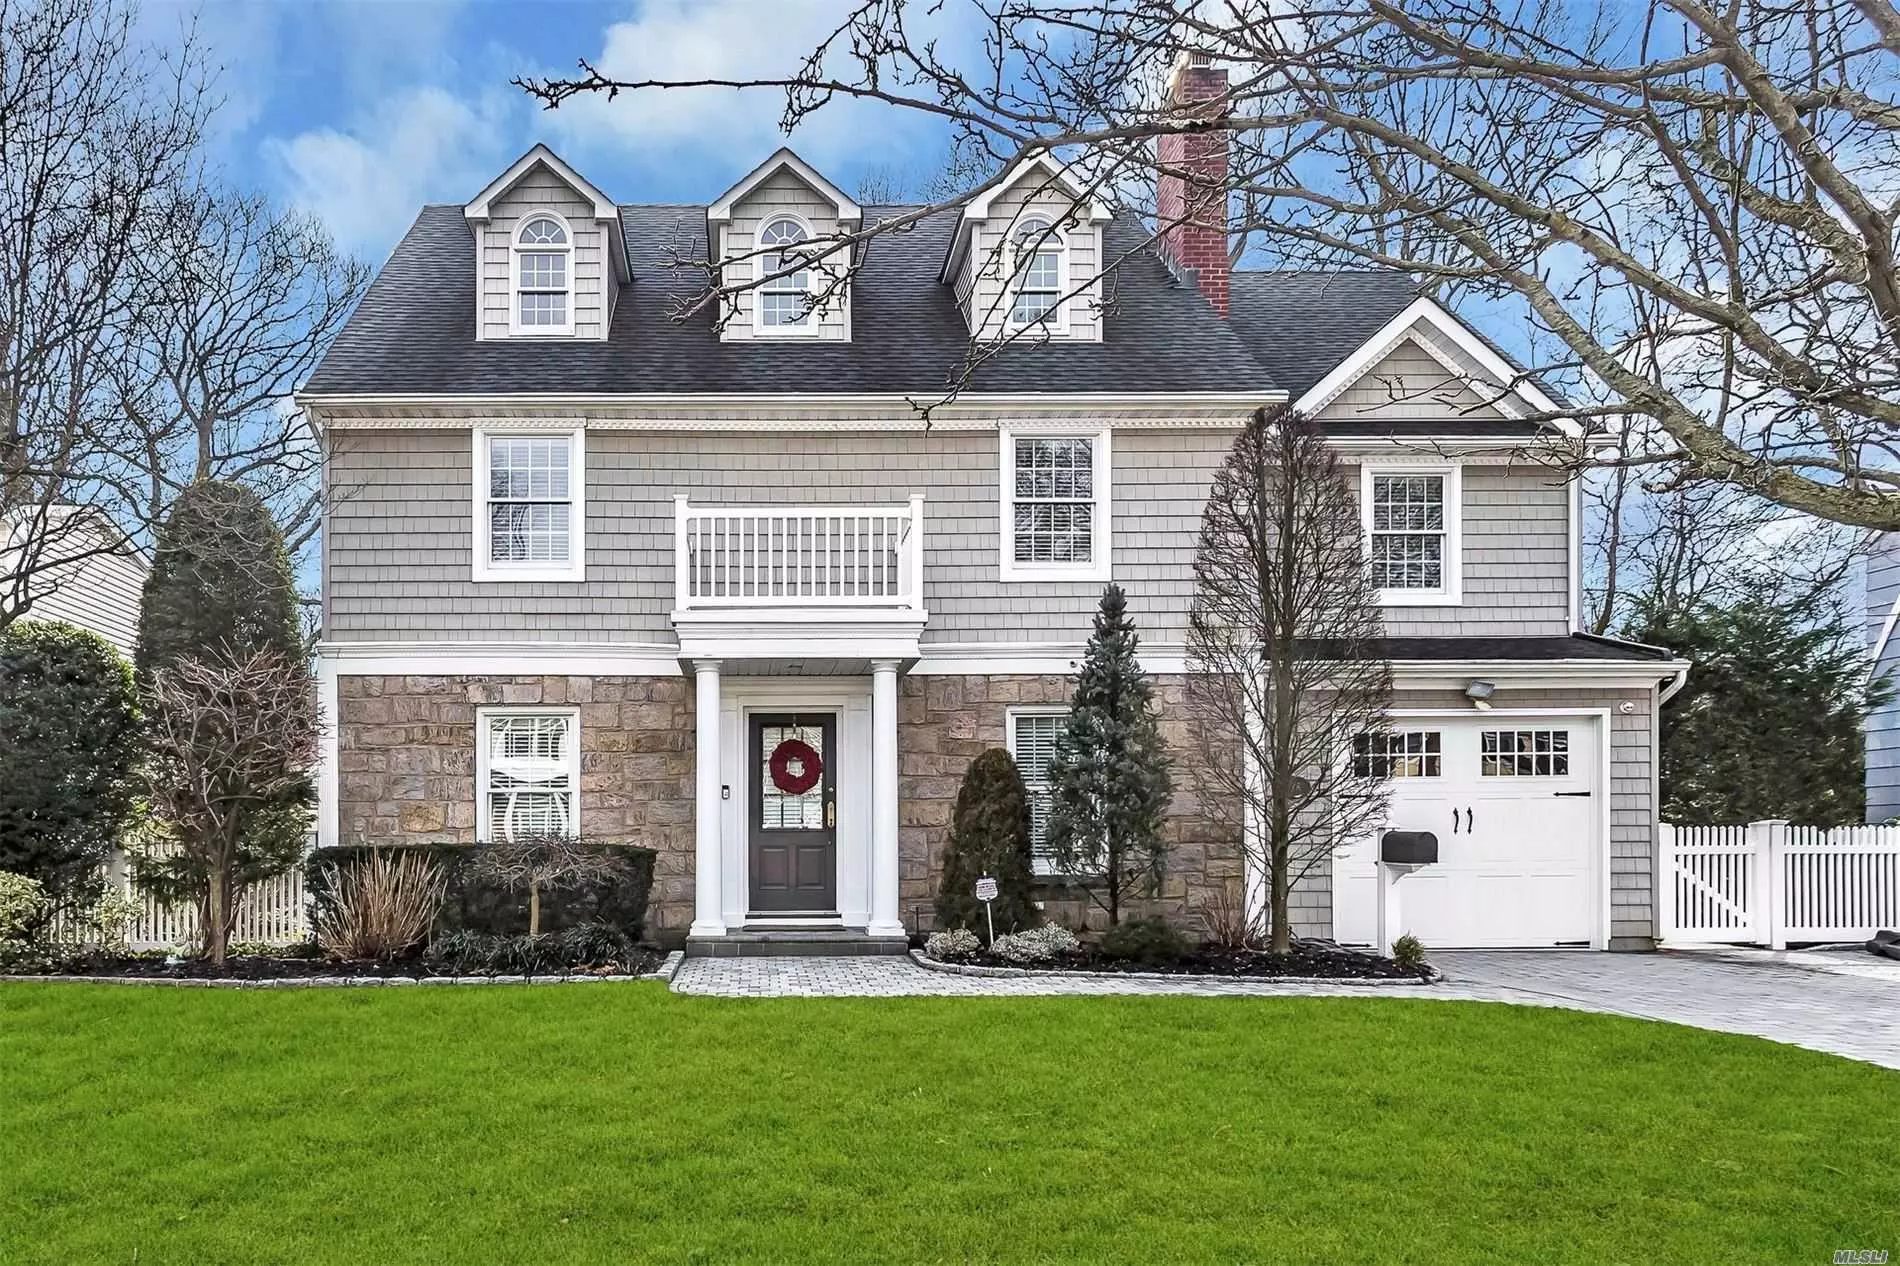 Heart of Merrick Woods! Stunning, Custom 4 bdrm 2 1/2 bth Colonial! State of the Art EIK, oversized center Island w/Calacatta Gold Marble, Wolf Stove, Sub Zero Fridge, wine fridge, Bosche Dishwasher, Formal DR w/gas frplace & built-ins, Den w/gas frplce, Crown Moldings, Hardwood Flrs. Master Suite w/separate office, Huge Master Bth, 3 bdrm, Full Bth, Radiant heat in upstairs baths, Storage Galore, Fin. Bsmt! Whole house water filtration, Close to LIRR, Approx. 40 min express to Penn!! Low Taxes!